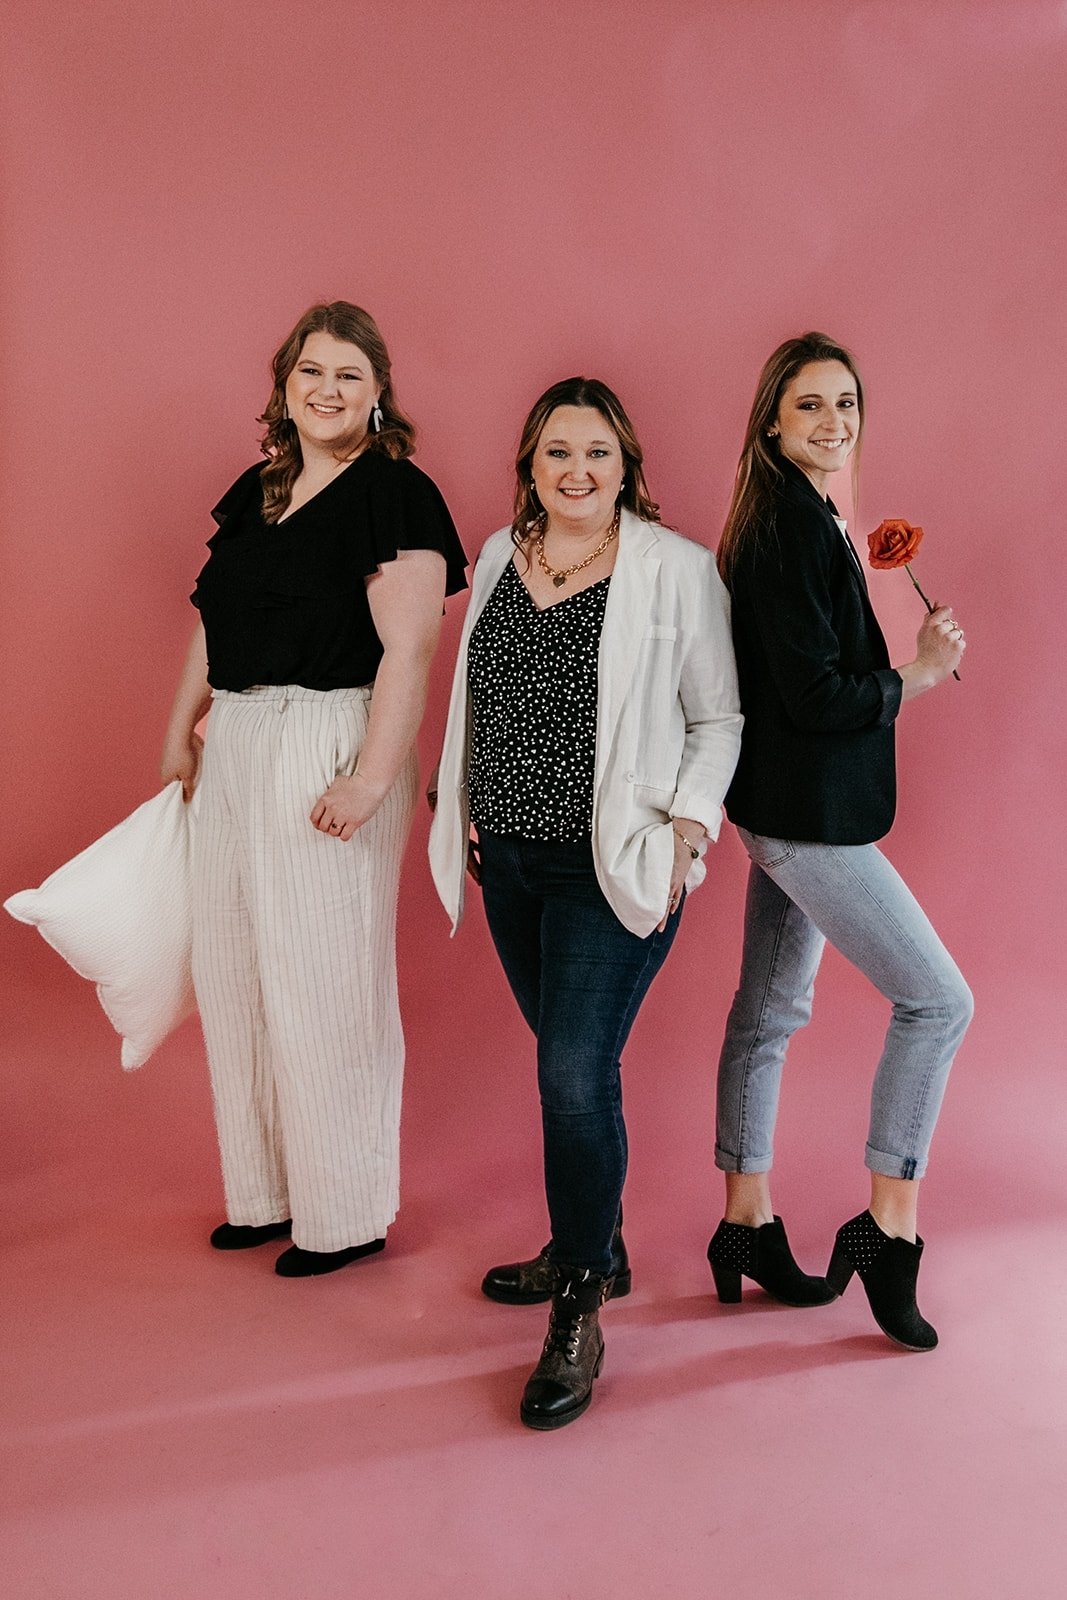 Meet the dream team of three behind phenomenal wedding days: 
Alissa from Superior Blooms, Ellen from The Vault, and Mariah from the True North Weddings team. ✨ 

Their dedication, hard work, and exceptional problem-solving skills make them amazing v